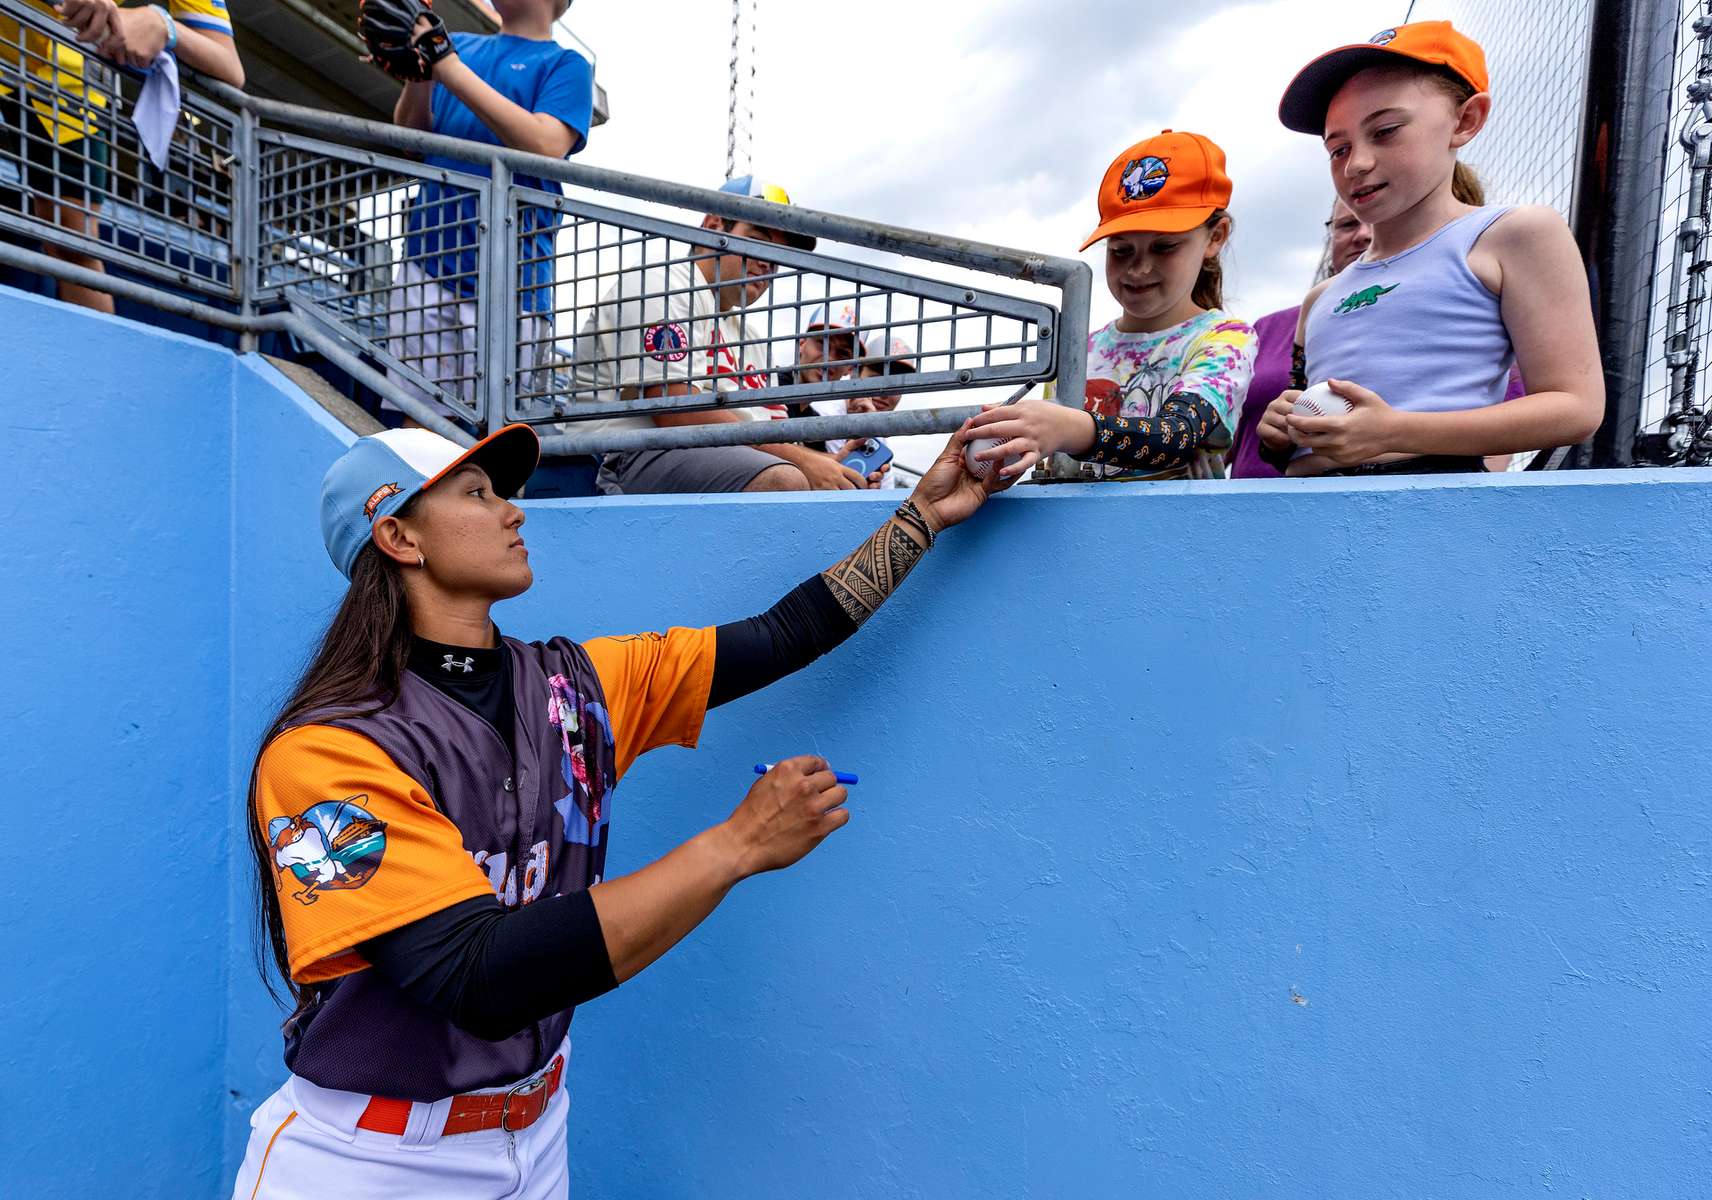 Kelsie Whitmore signs autograph before her game against the Charleston Dirty Birds at Richmond County Bank Ballpark on July 08, 2022 in Staten Island, New York.  Whitmore was the first woman to appear in the starting lineup in an Atlantic League game.  Her debut in the Atlantic League was a pinch runner on April 22, and became the first woman to start an Atlantic League game on May 1,  playing as a left fielder.  On May 4, she became the first woman to pitch in an Atlantic League game. 